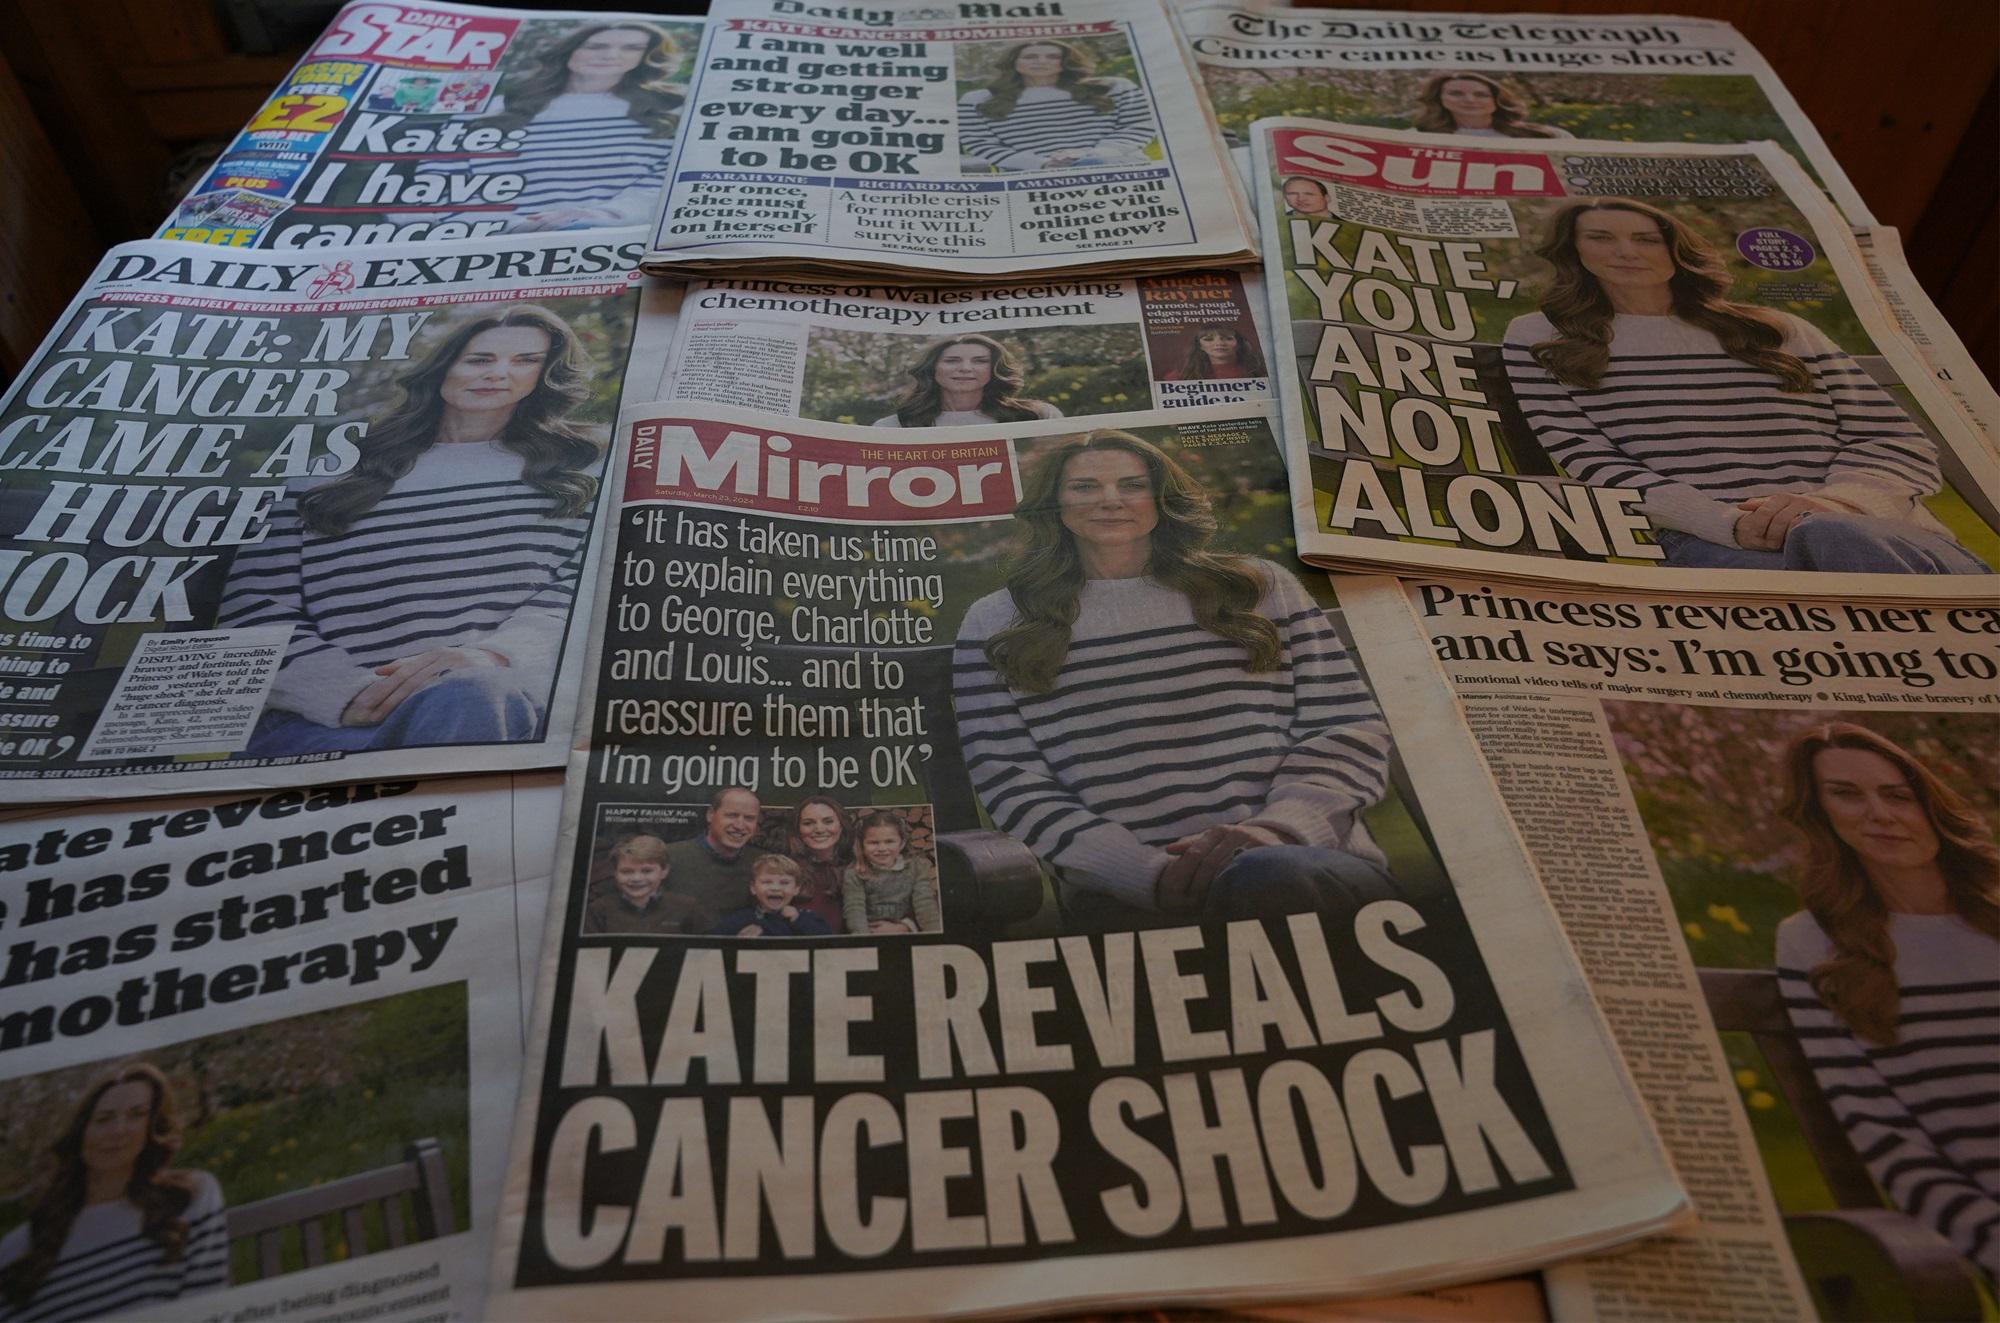 Kate Middleton and the ongoing rumors of cancer